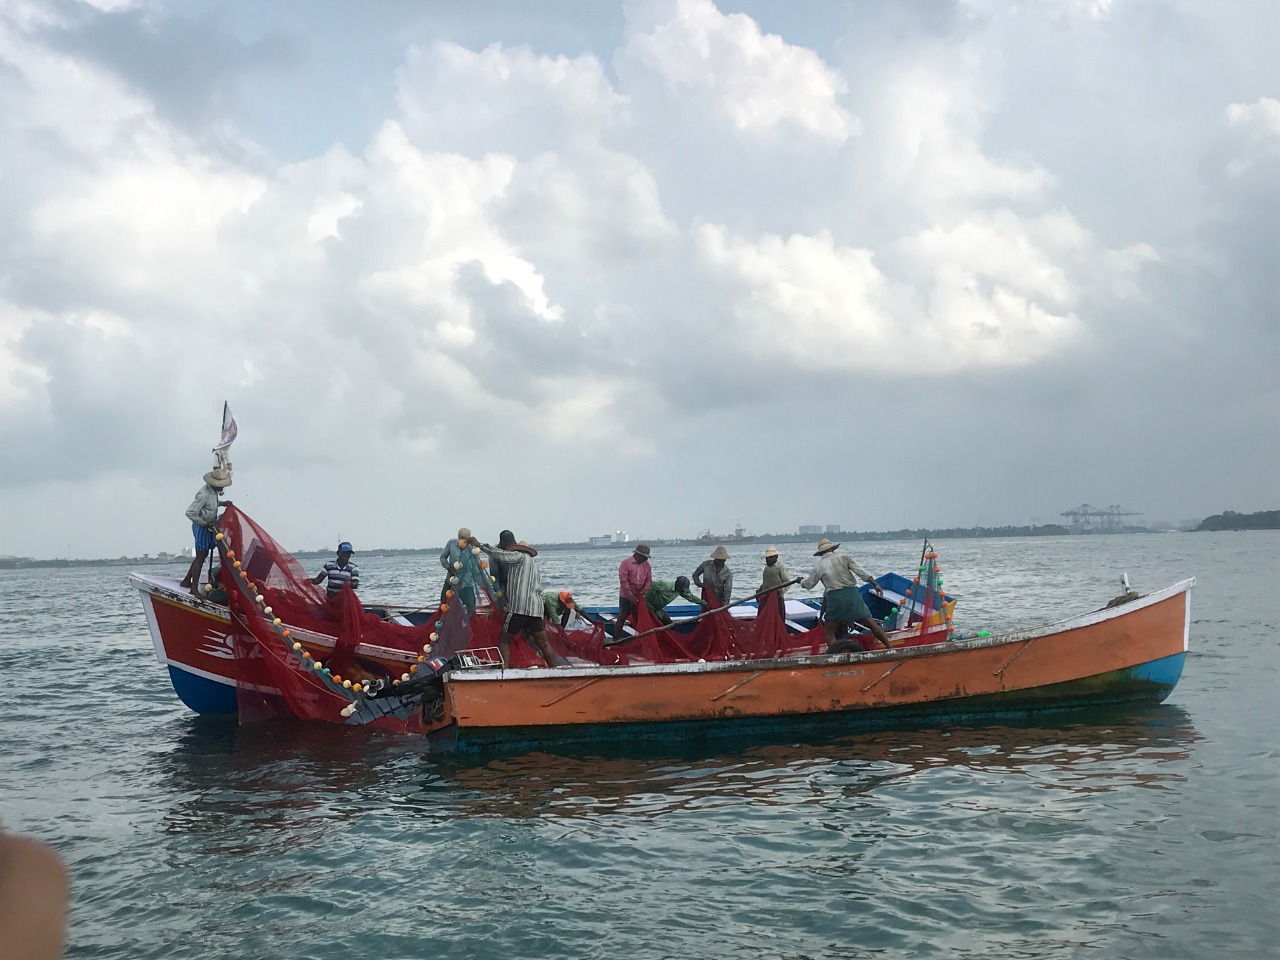 Lockdown enforced when they were at sea — so more than a lakh of fishers  now wait in deep waters - Gaonconnection